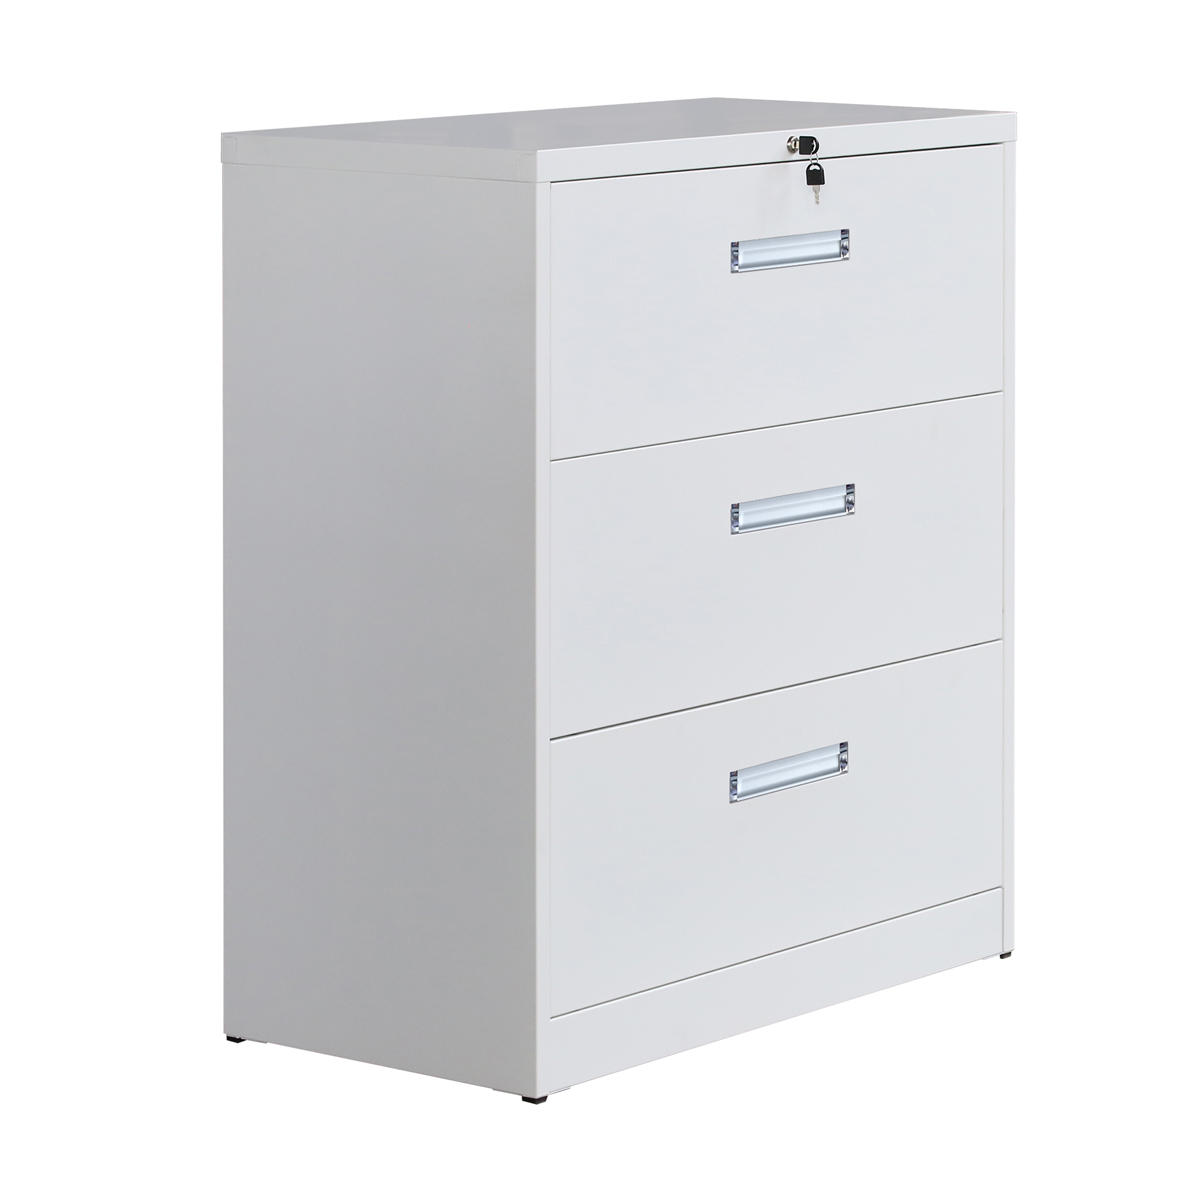 3 Drawers Metal Vertical File Cabinet Lockable With Hanging File